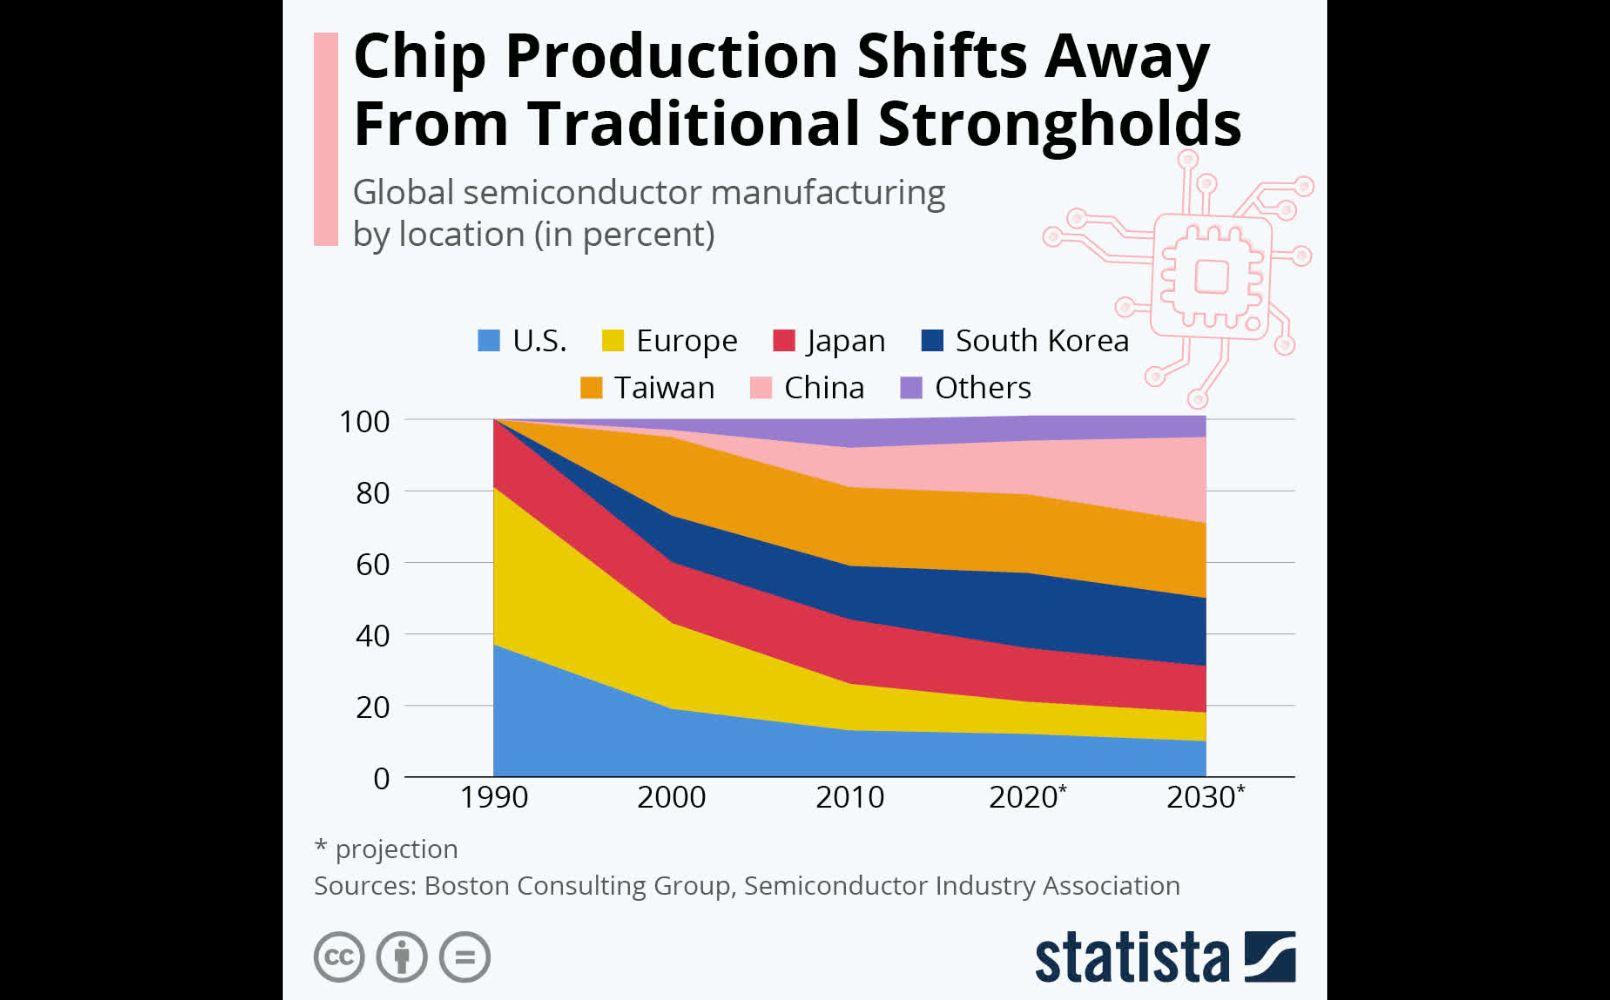 Chip production shifts